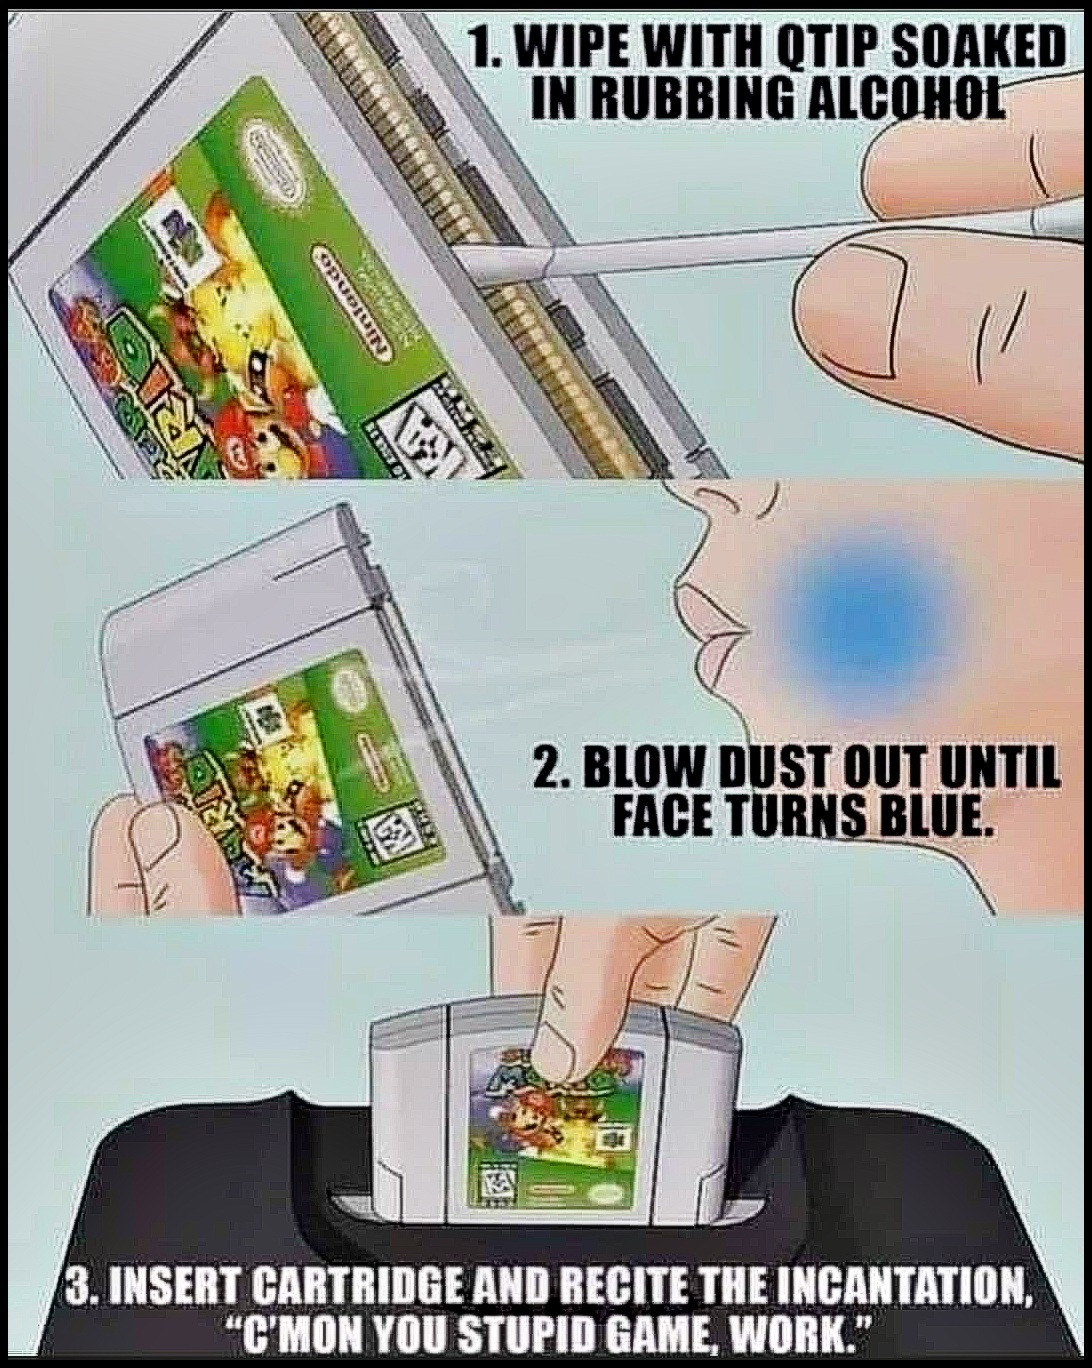 funny gaming memes - Video game - 1. Wipe With Qtip Soaked In Rubbing Alcohol inst Cd 22 2. Blow Dust Out Until Face Turns Blue. 3. Insert Cartridge And Recite The Incantation, "C'Mon You Stupid Game, Work."